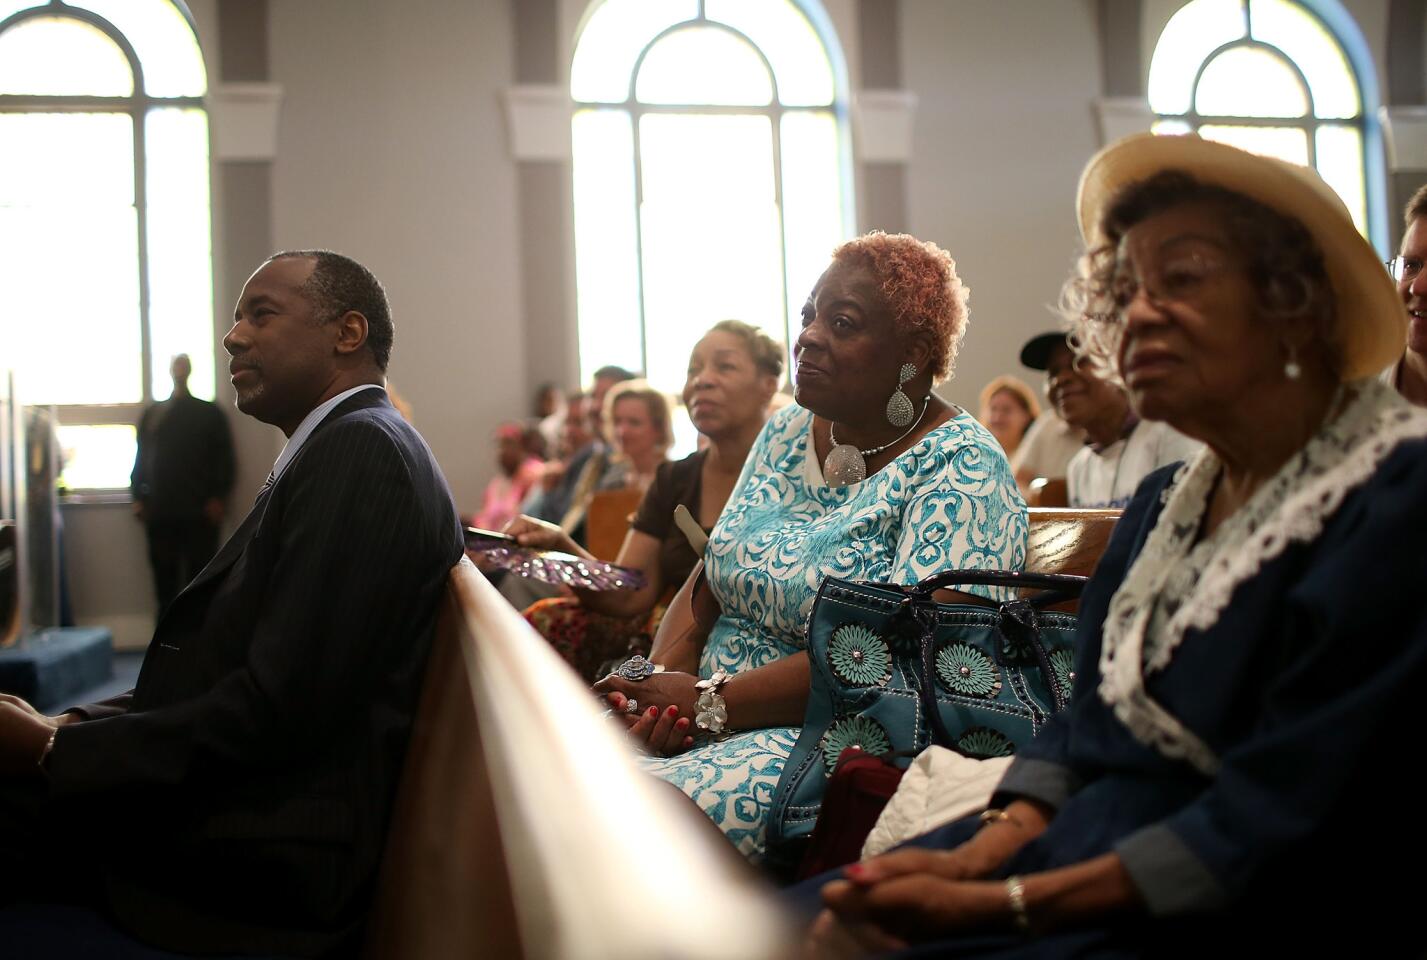 Republican presidential hopeful Ben Carson looks on during church services at Maple Street Missionary Baptist Church in Des Moines , Iowa.